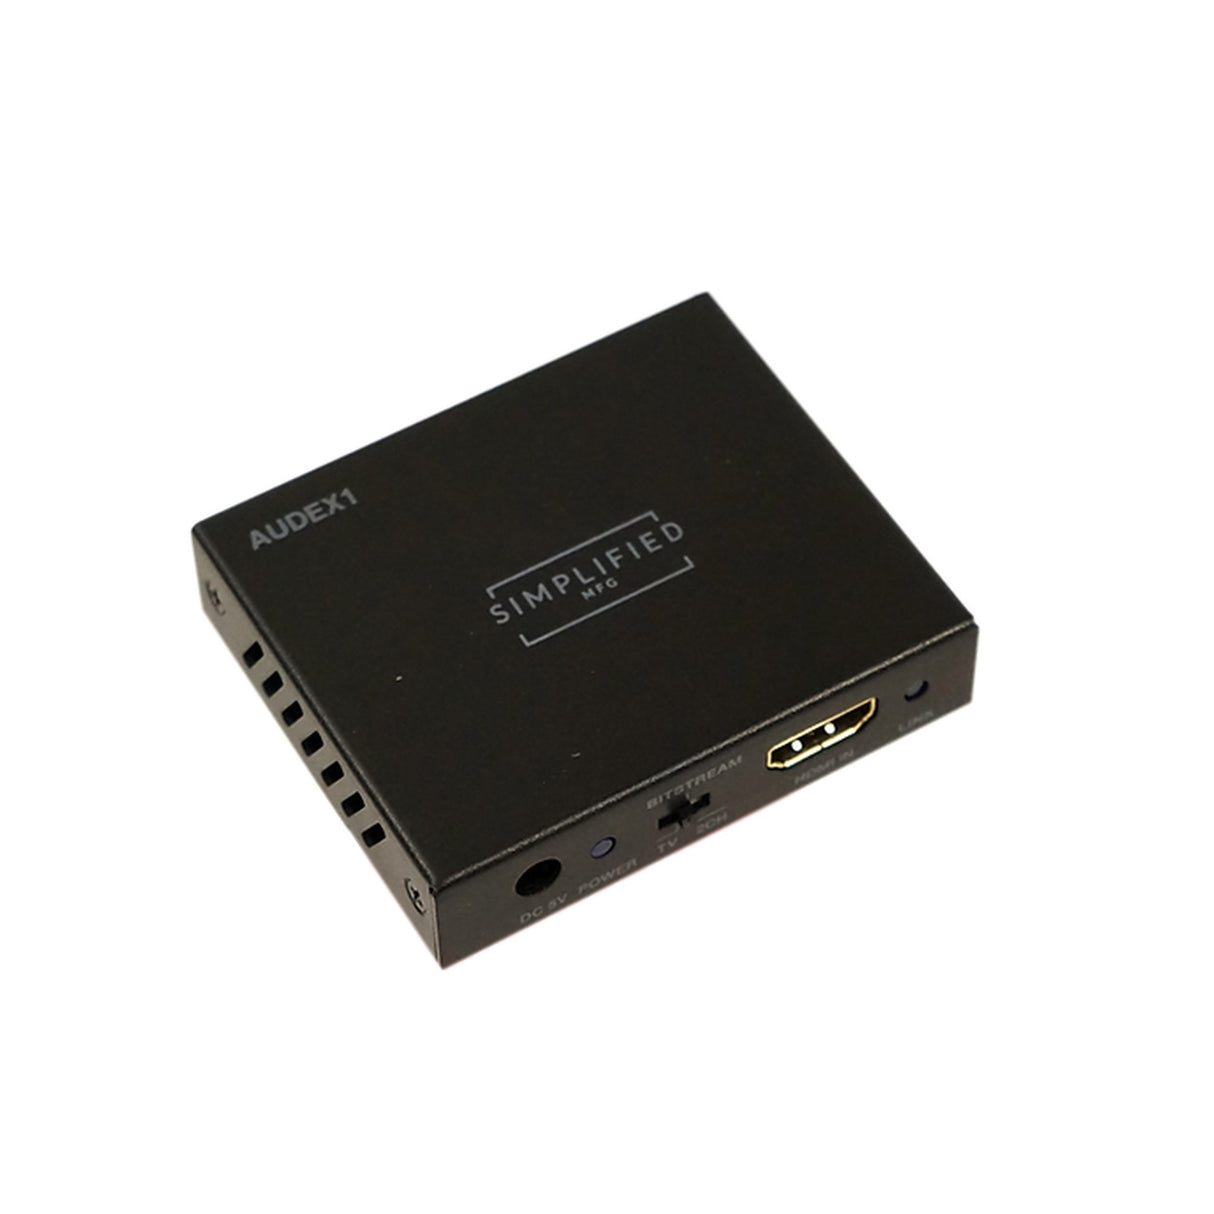 Simplified MFG AUDEX1 HDMI 18Gbps Audio Extractor